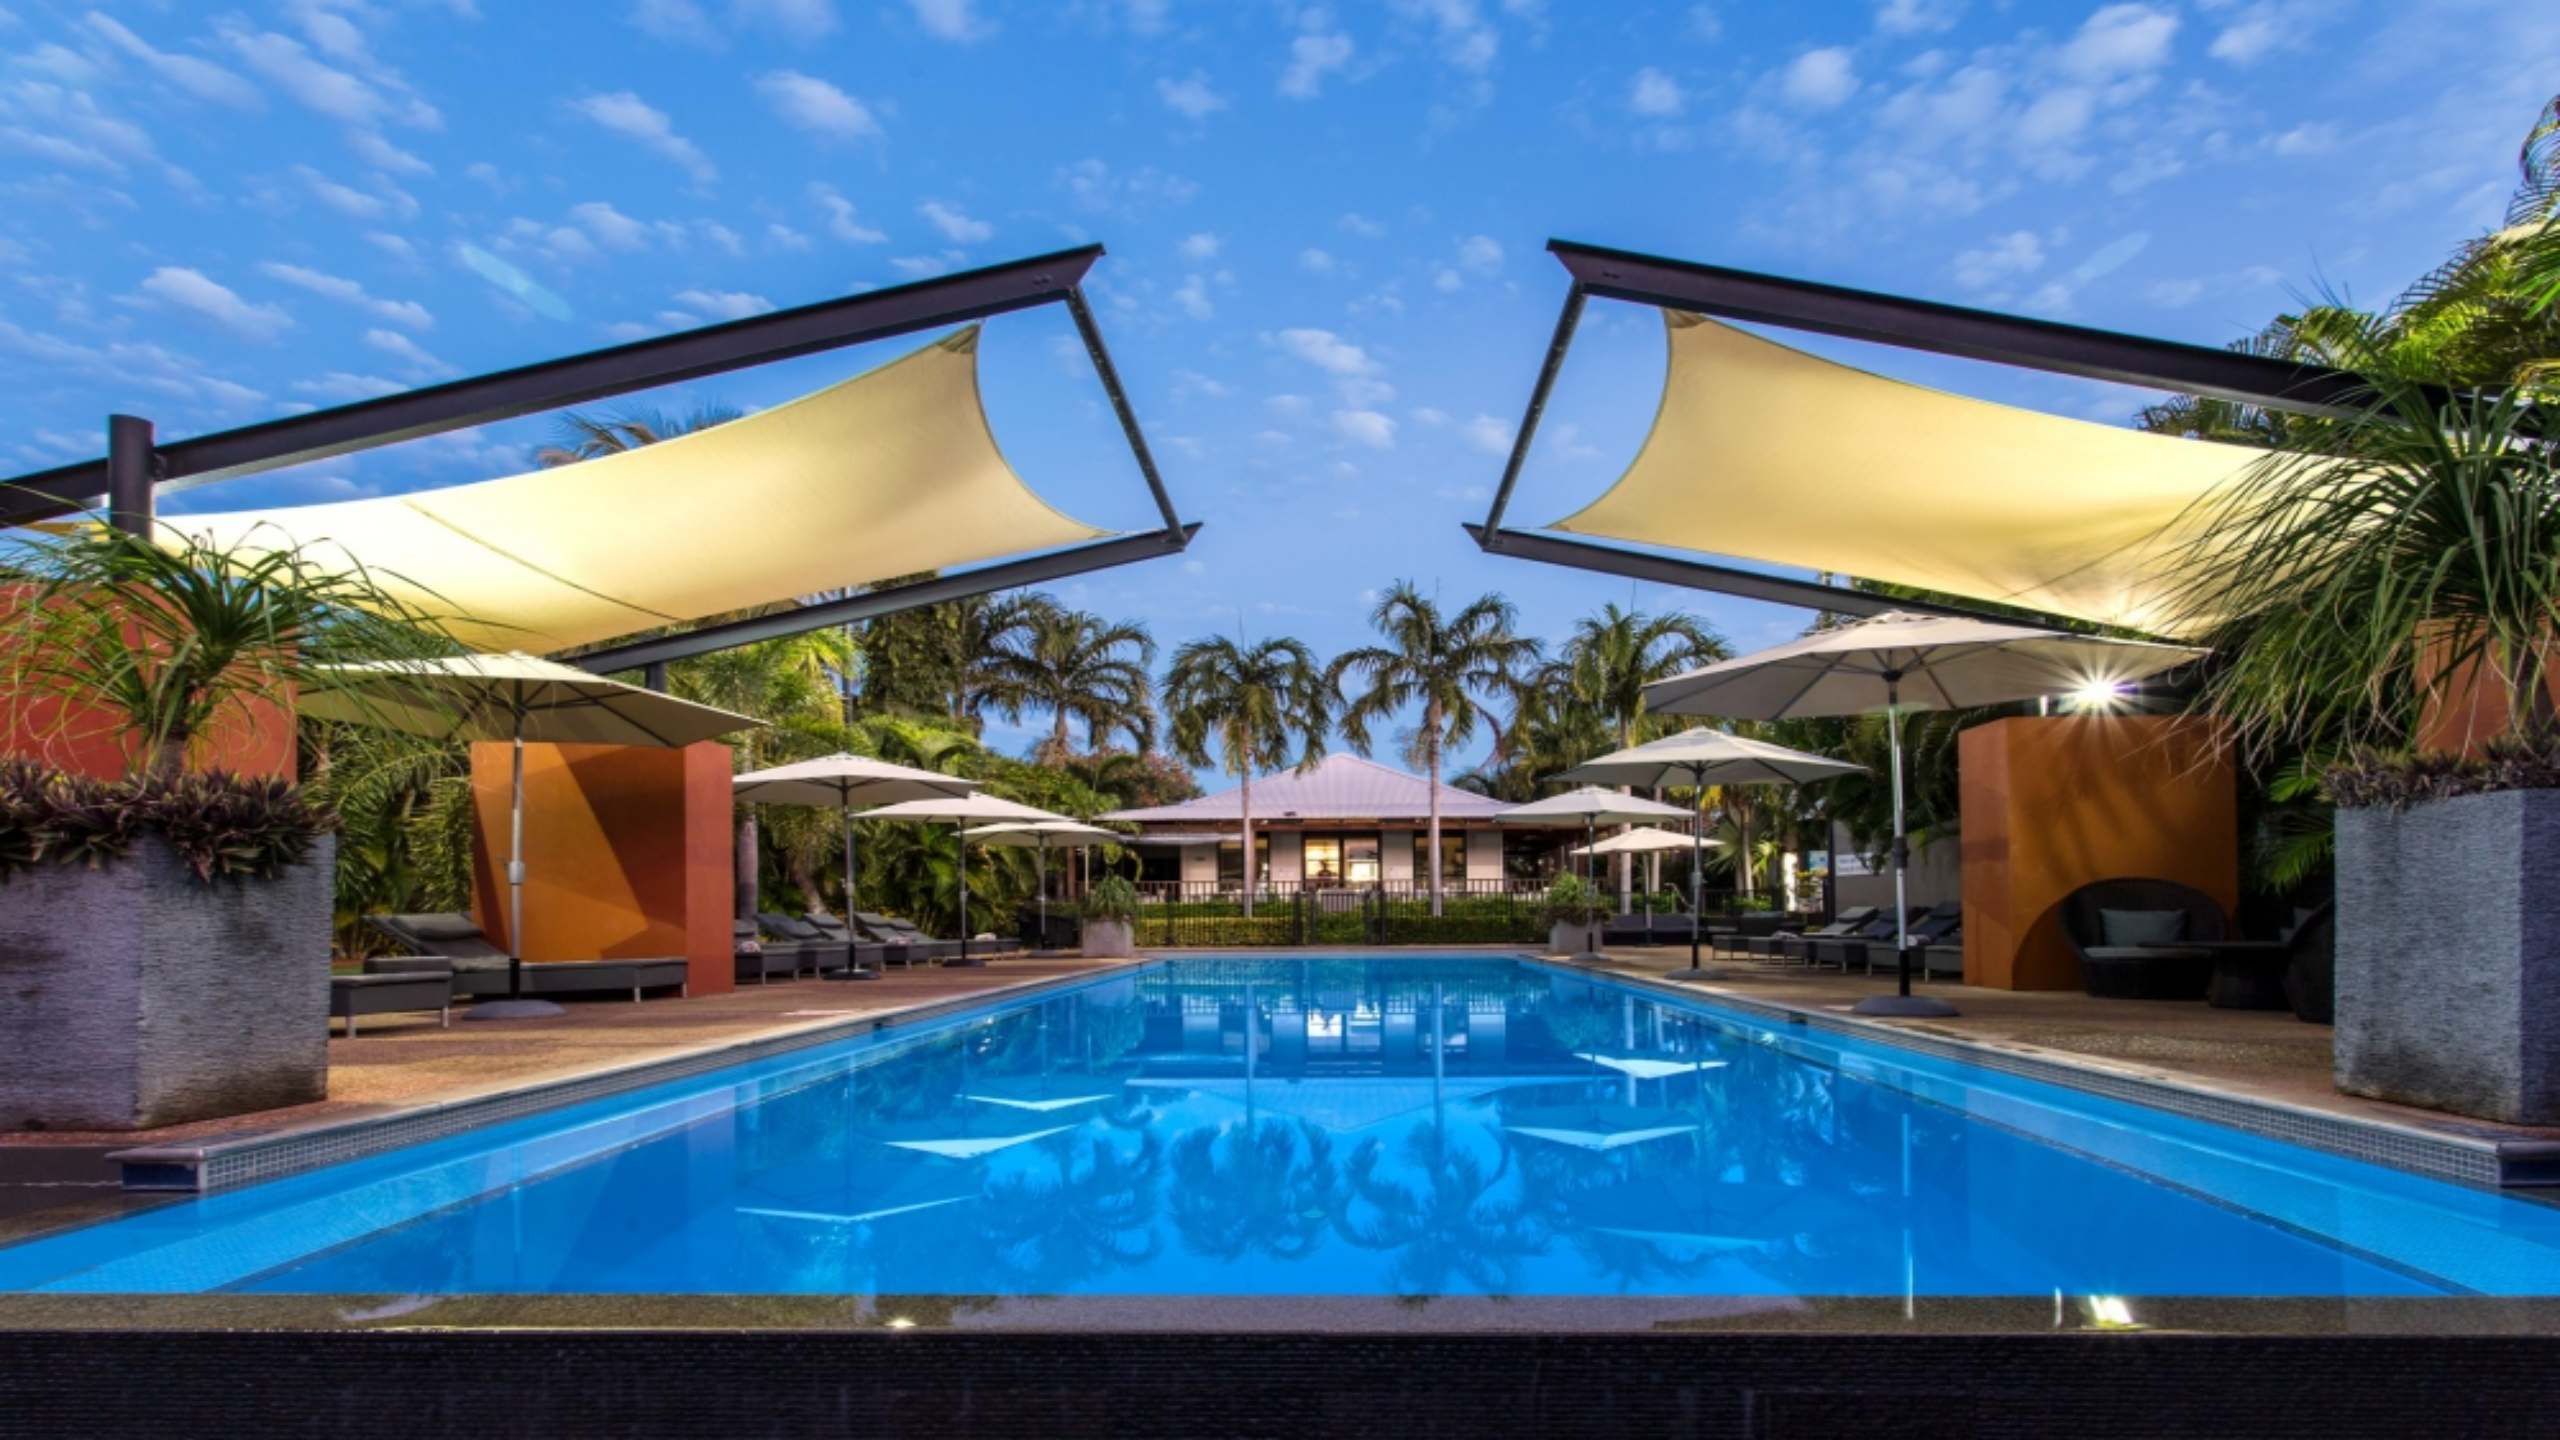 the-pearle-of-cable-beach-broome-western-australia-luxury-resort-outdoor-pool